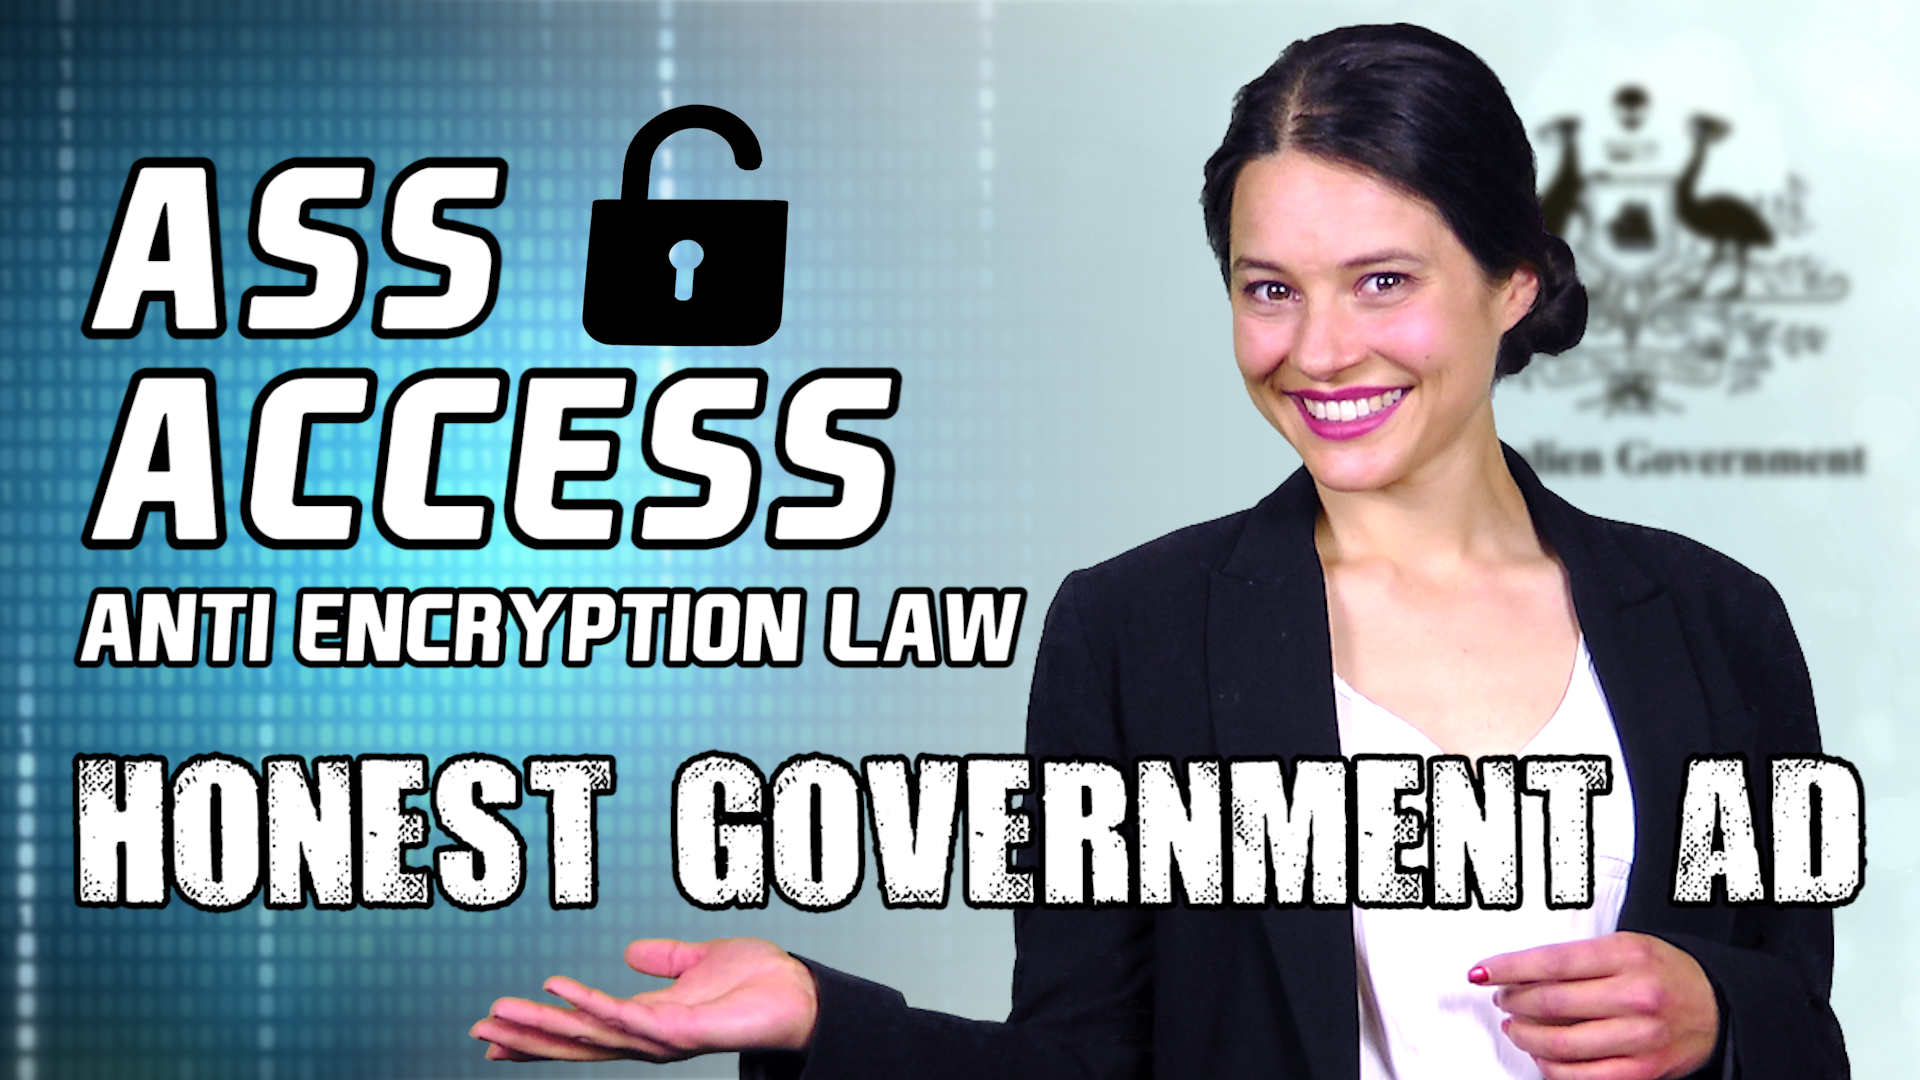 Honest Government Ad | Ass Access (anti-encryption law)